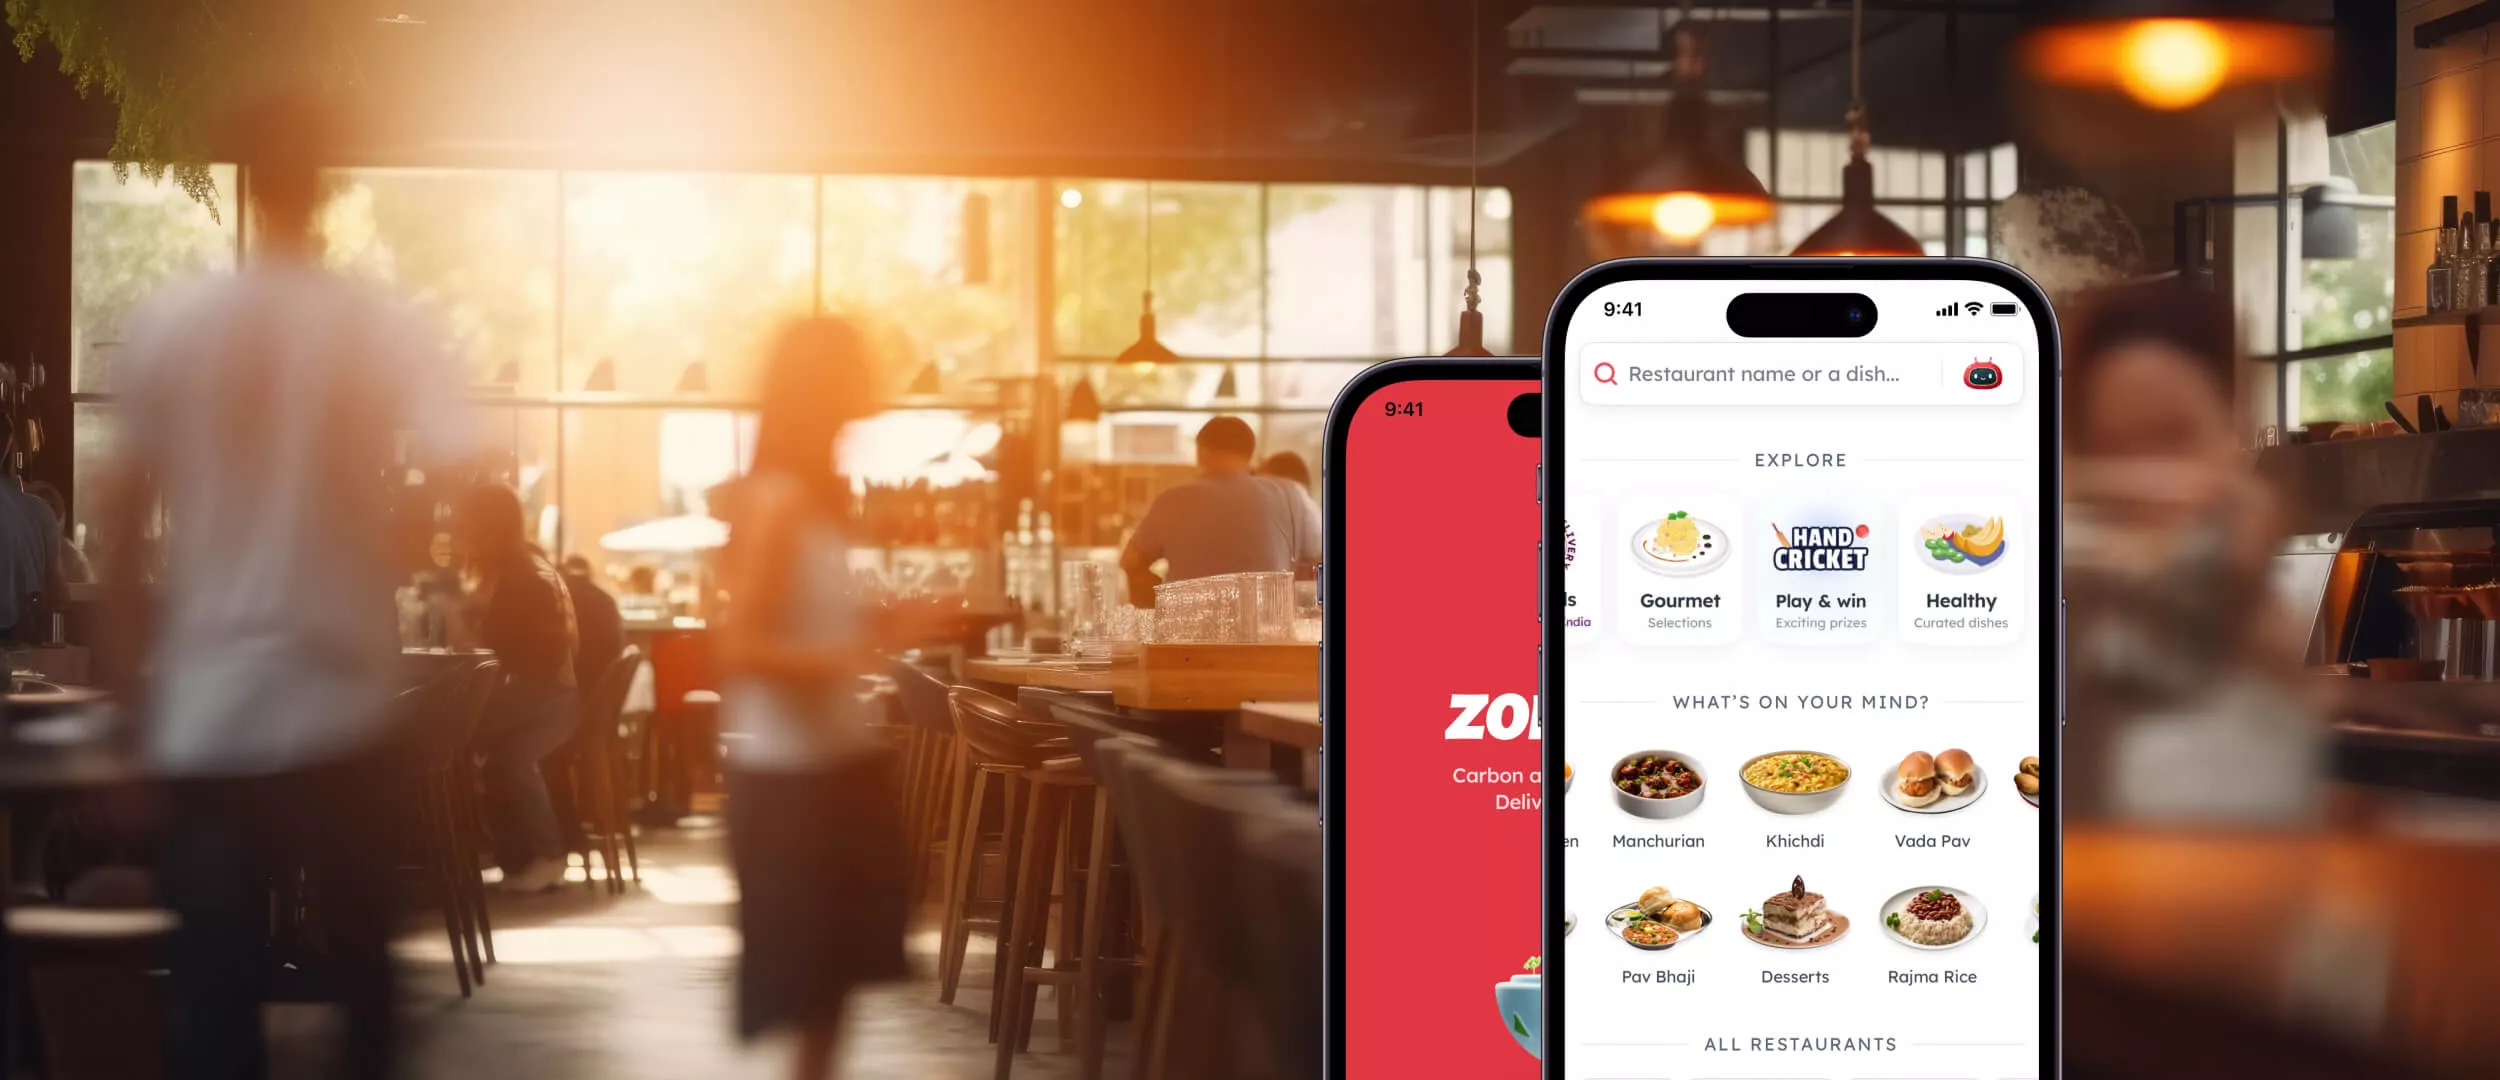 How to create a restaurant finder app like Zomato or Yelp